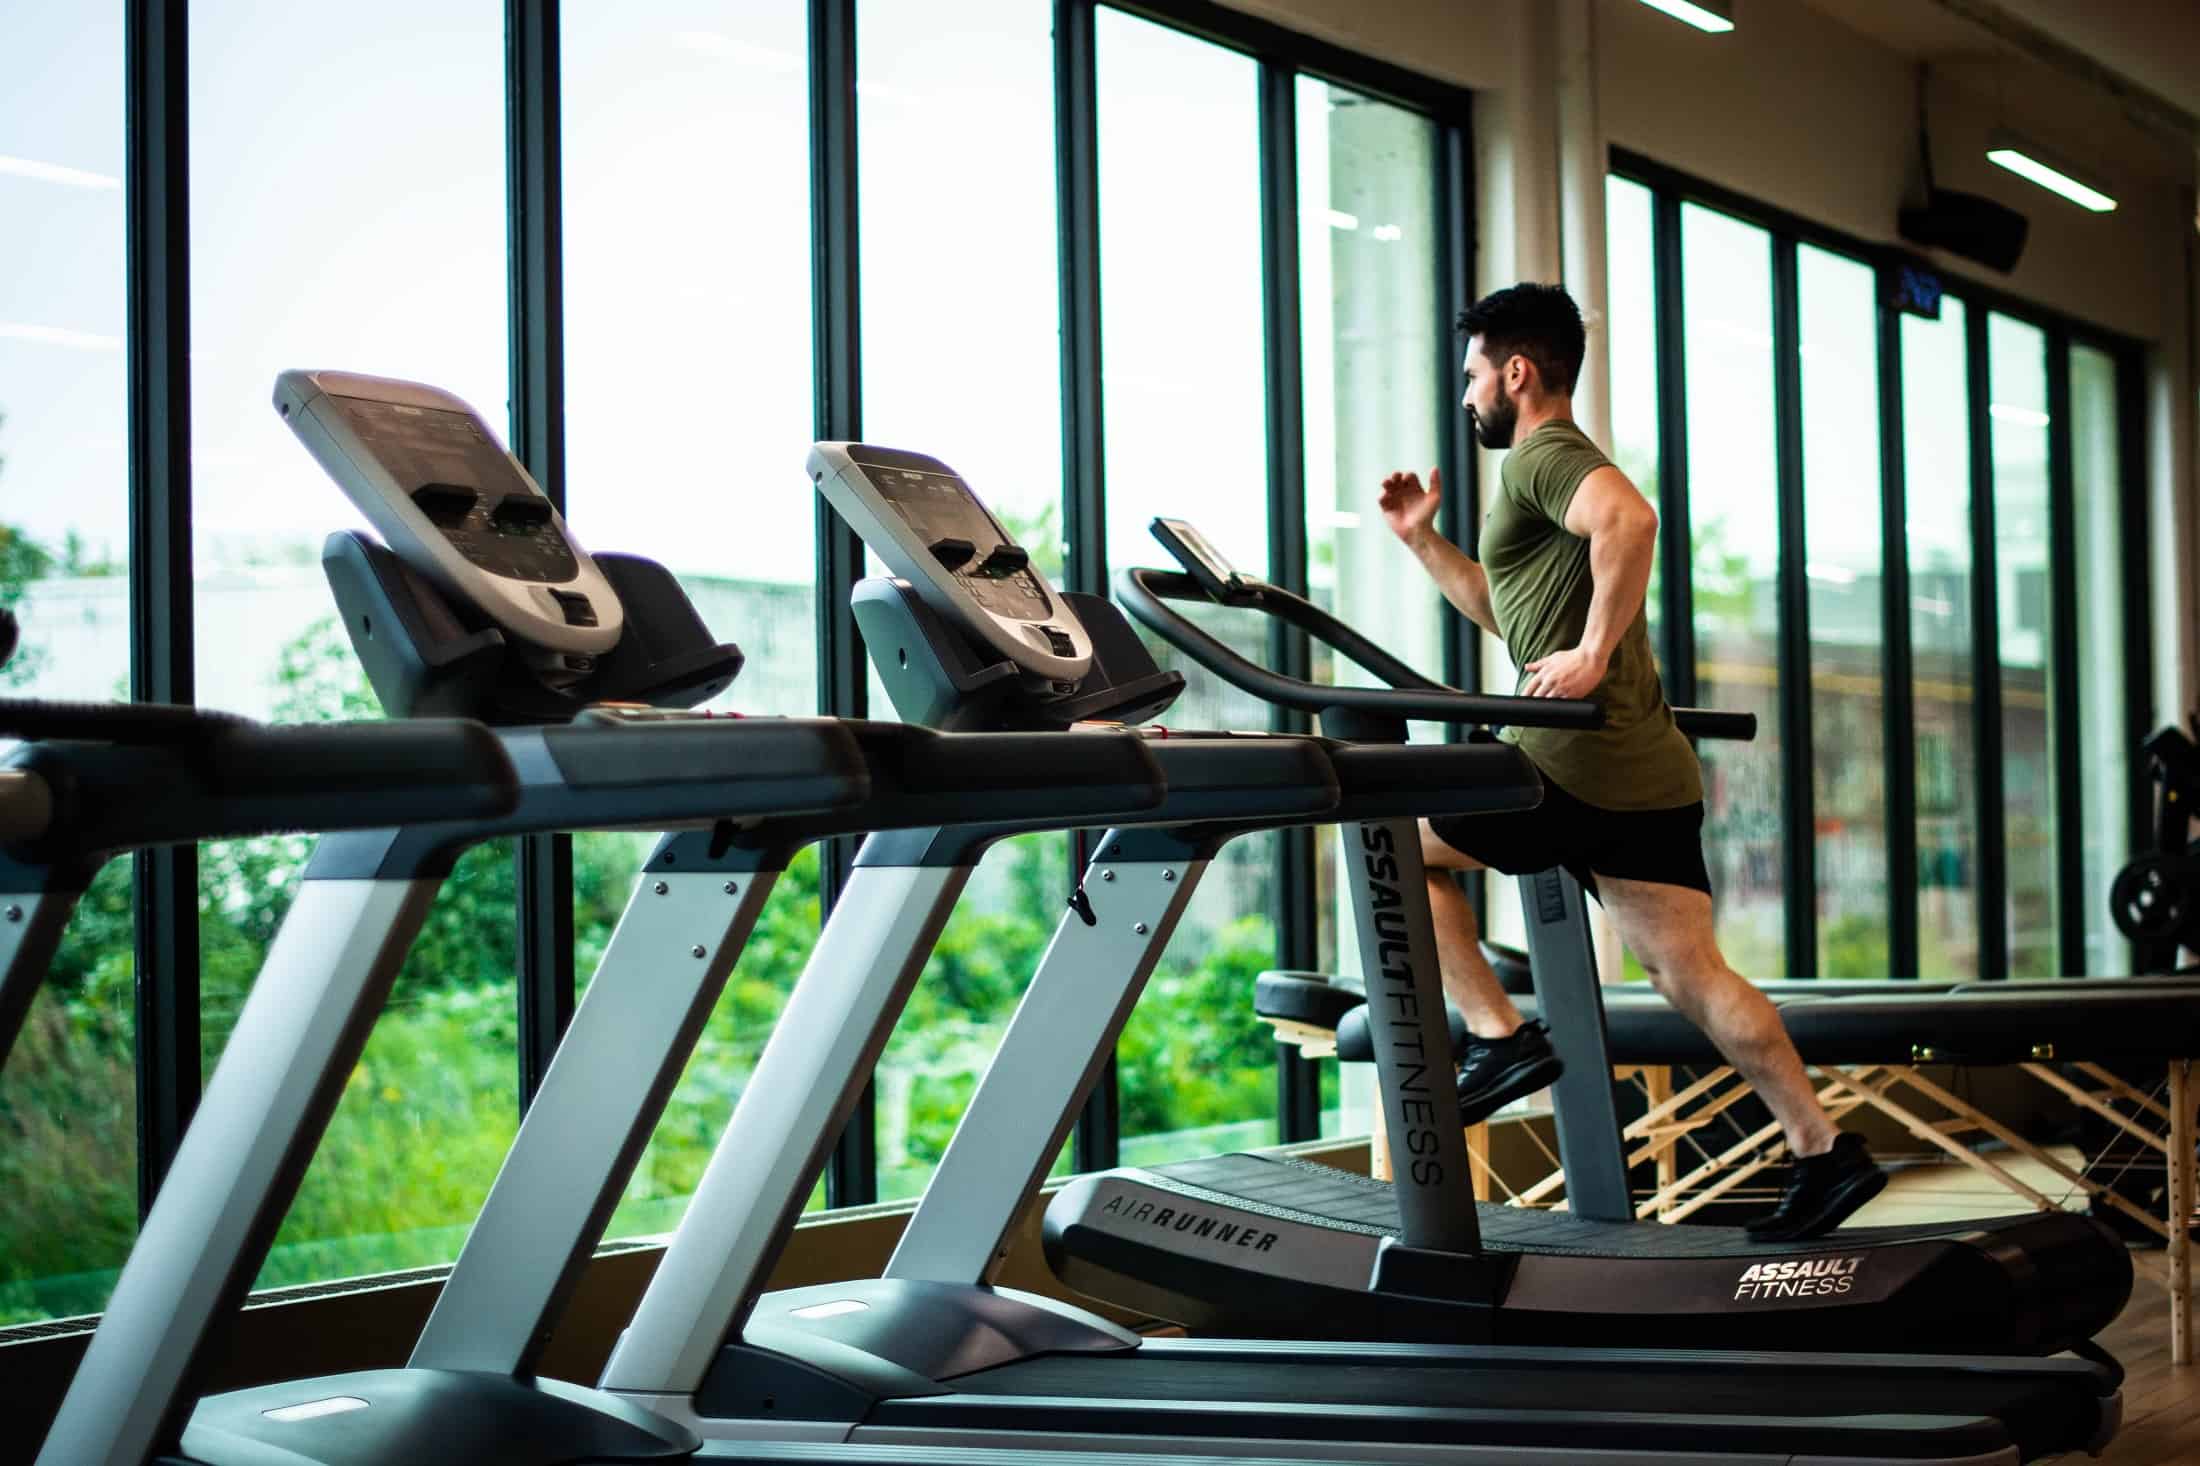 Treadmill running – everything you need to know about this workout